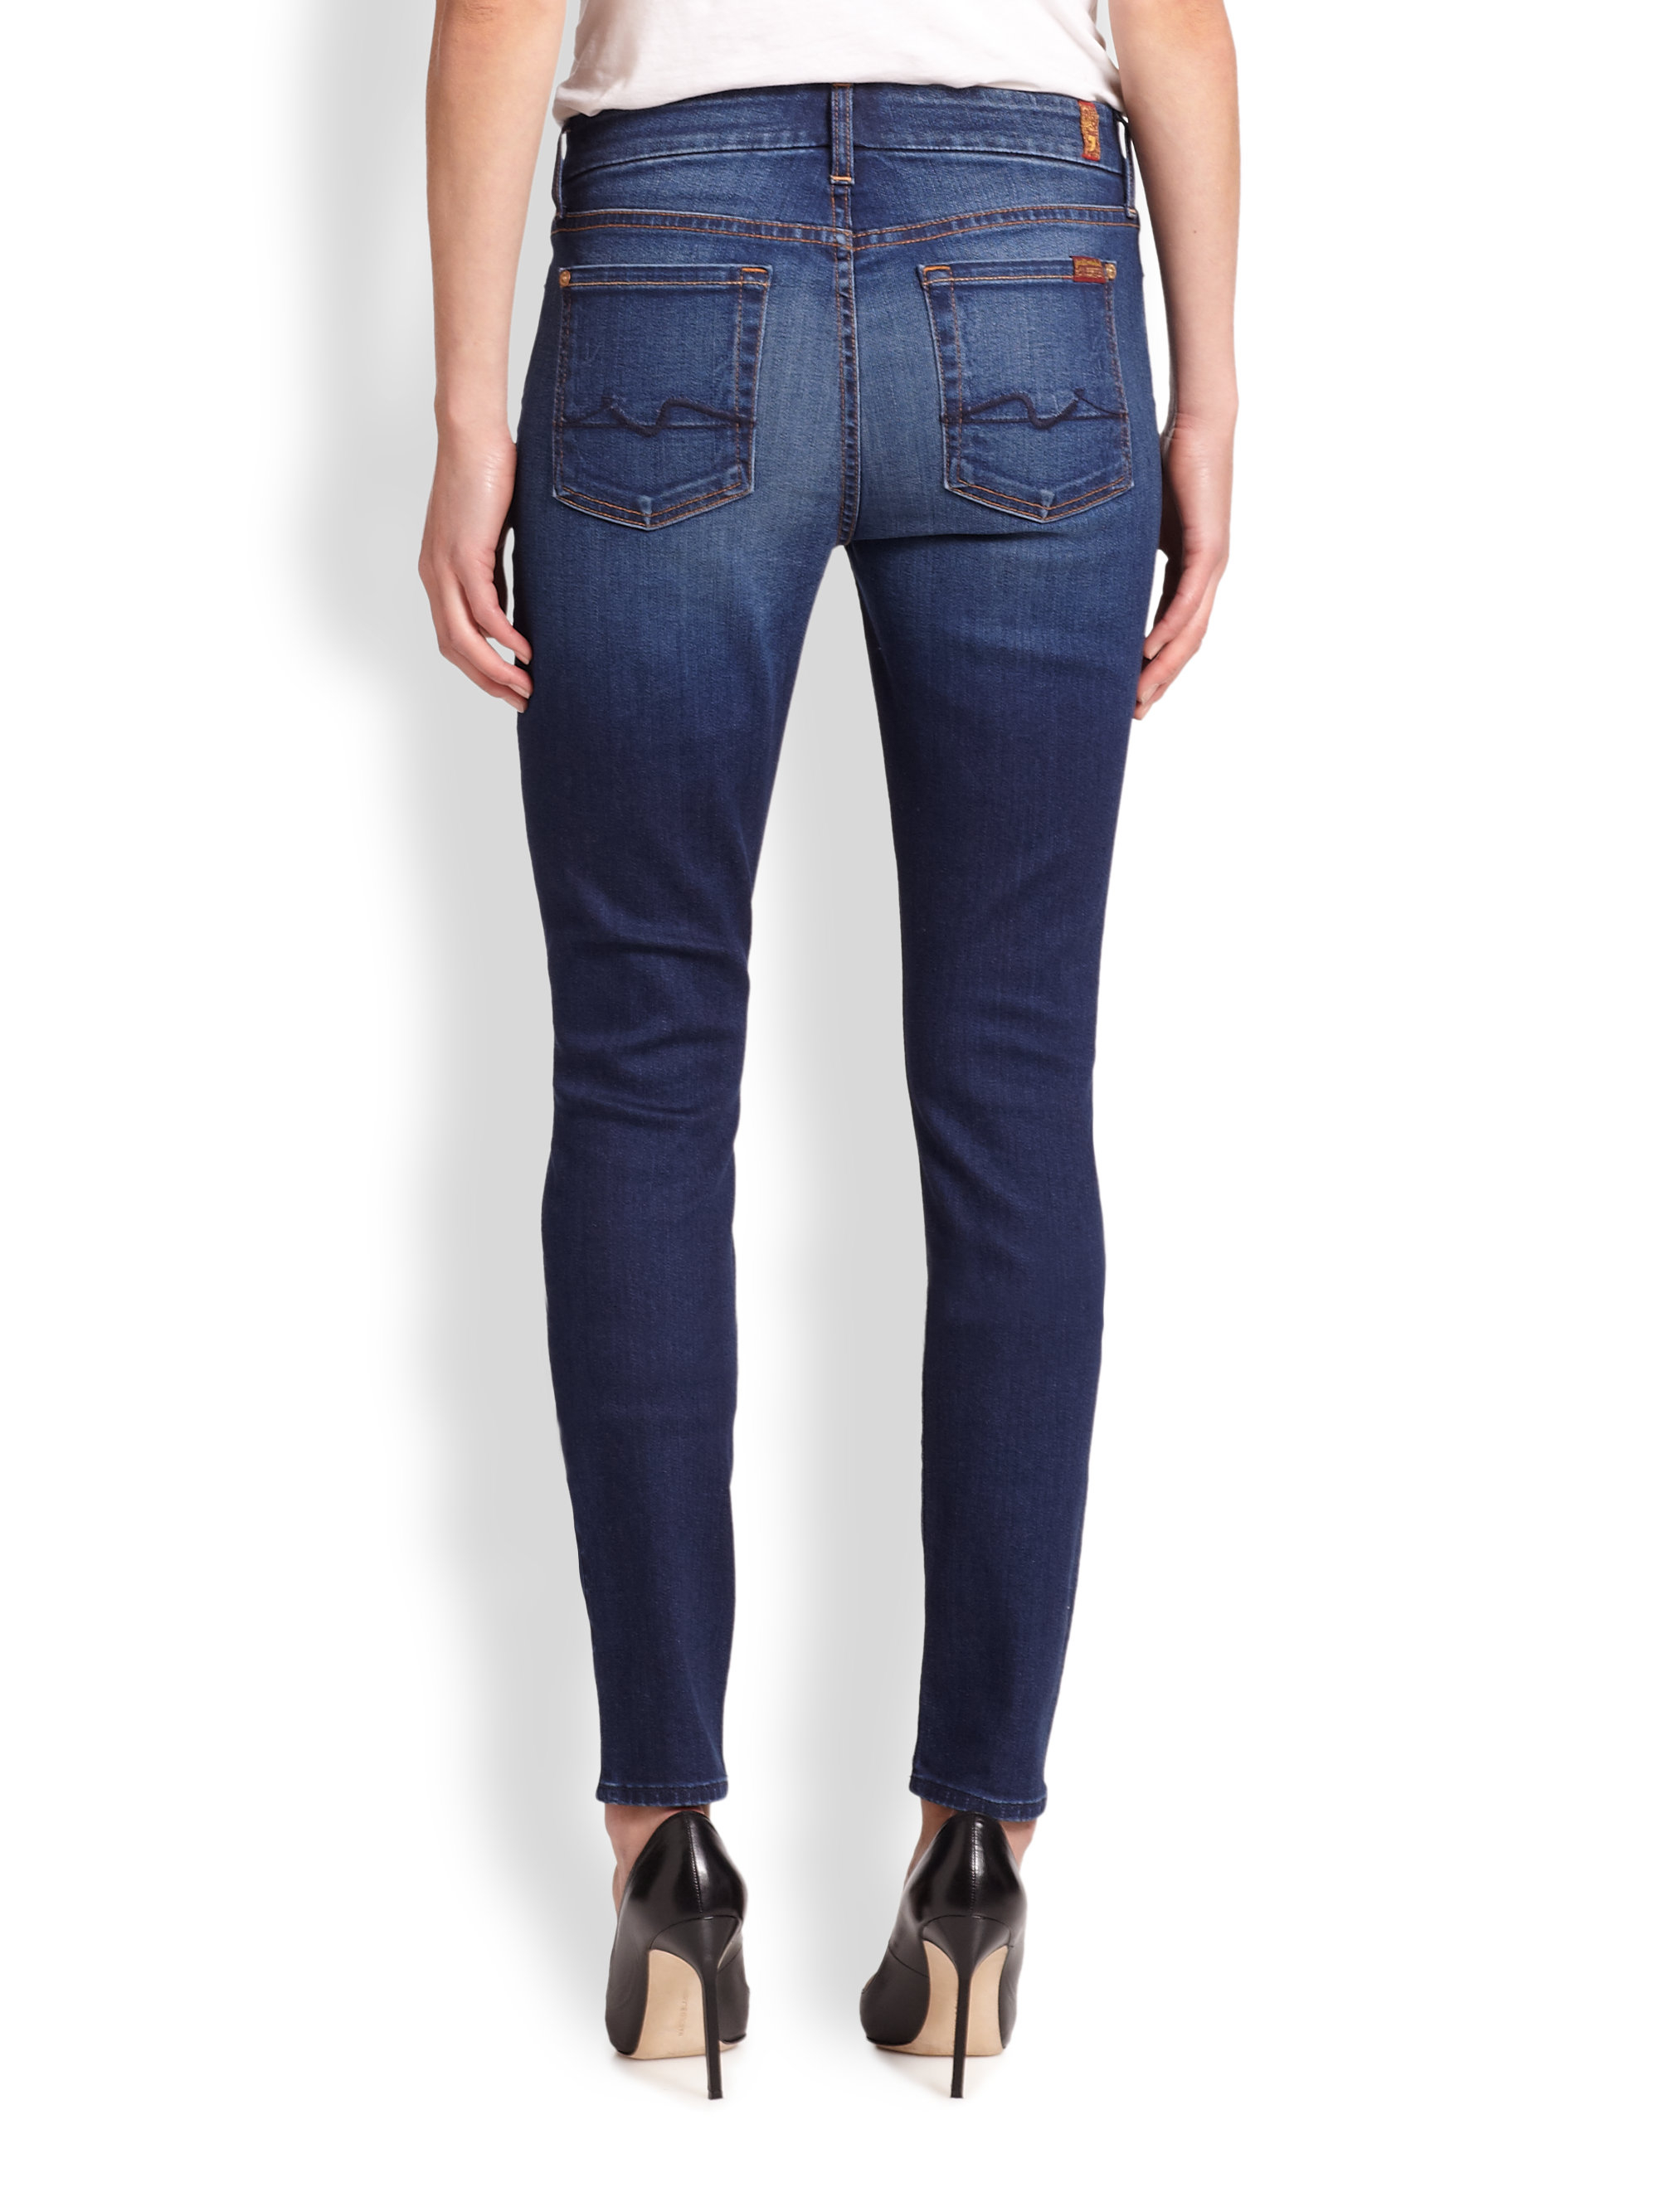 7 for all mankind Slim Illusion Skinny Jeans in Blue (GENEVA BLUE) Lyst